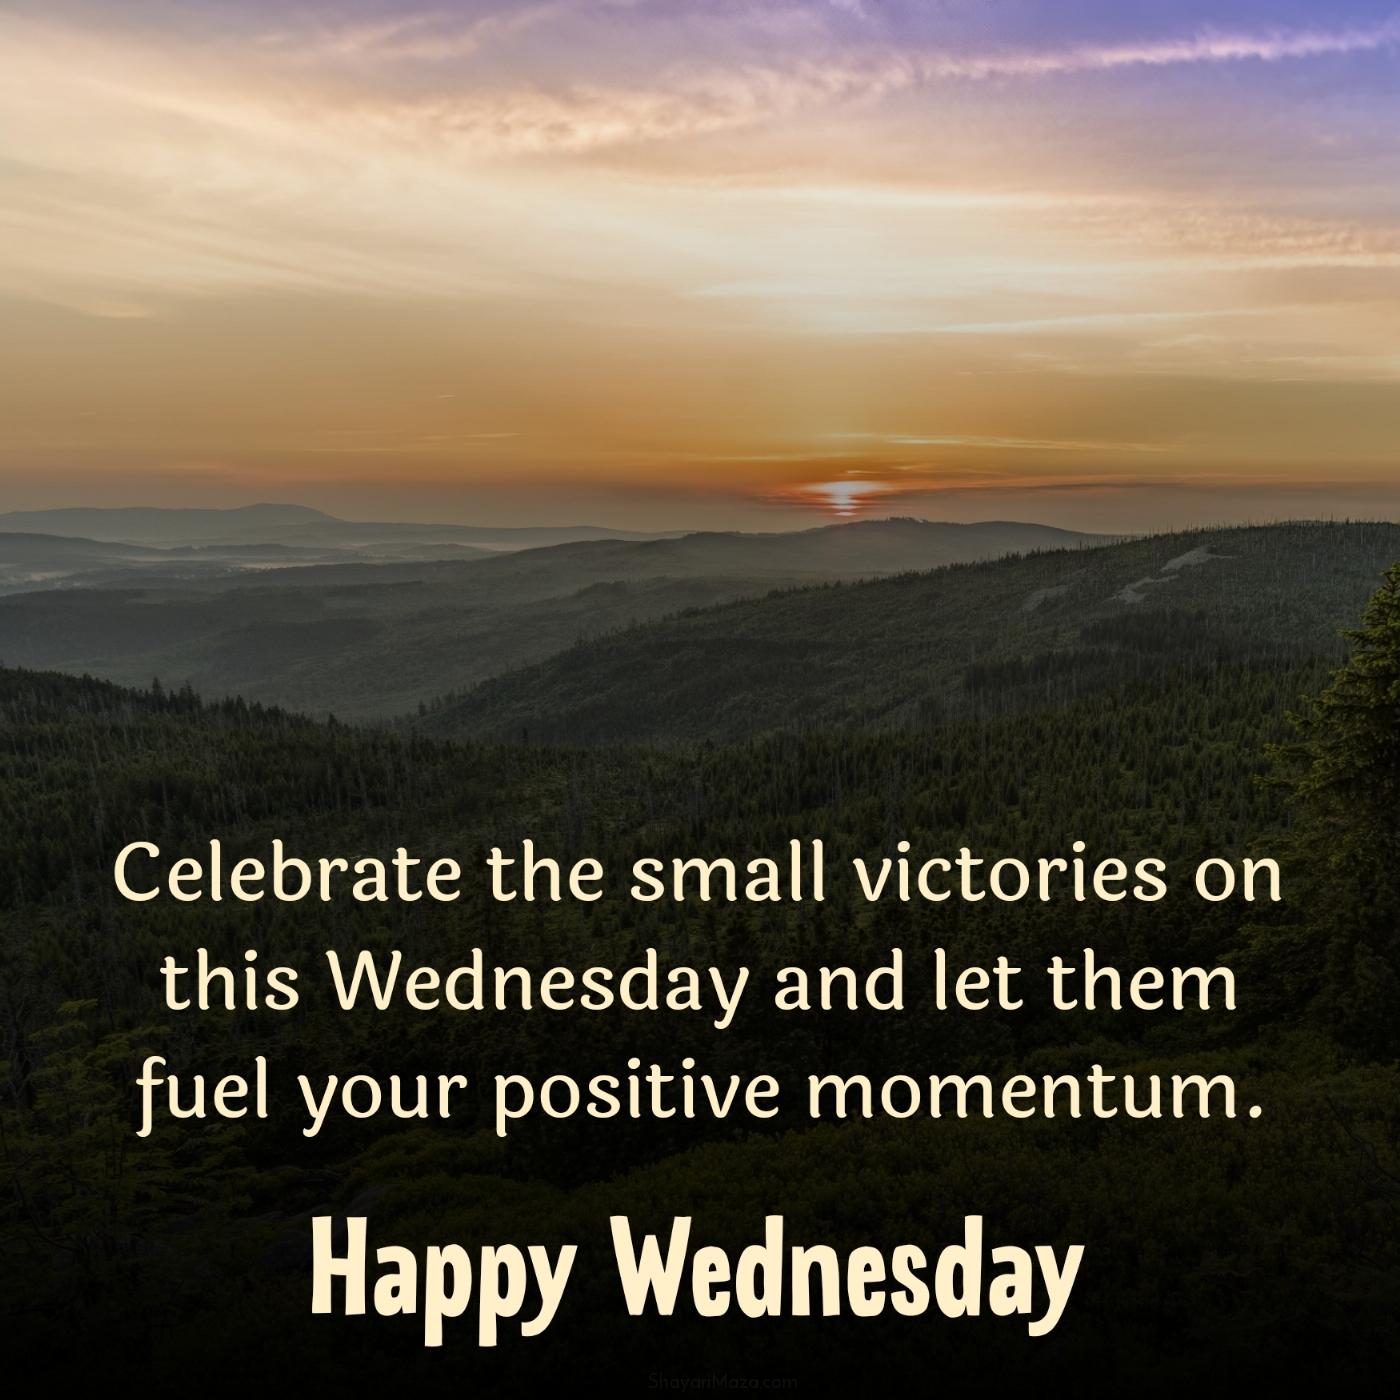 Celebrate the small victories on this Wednesday